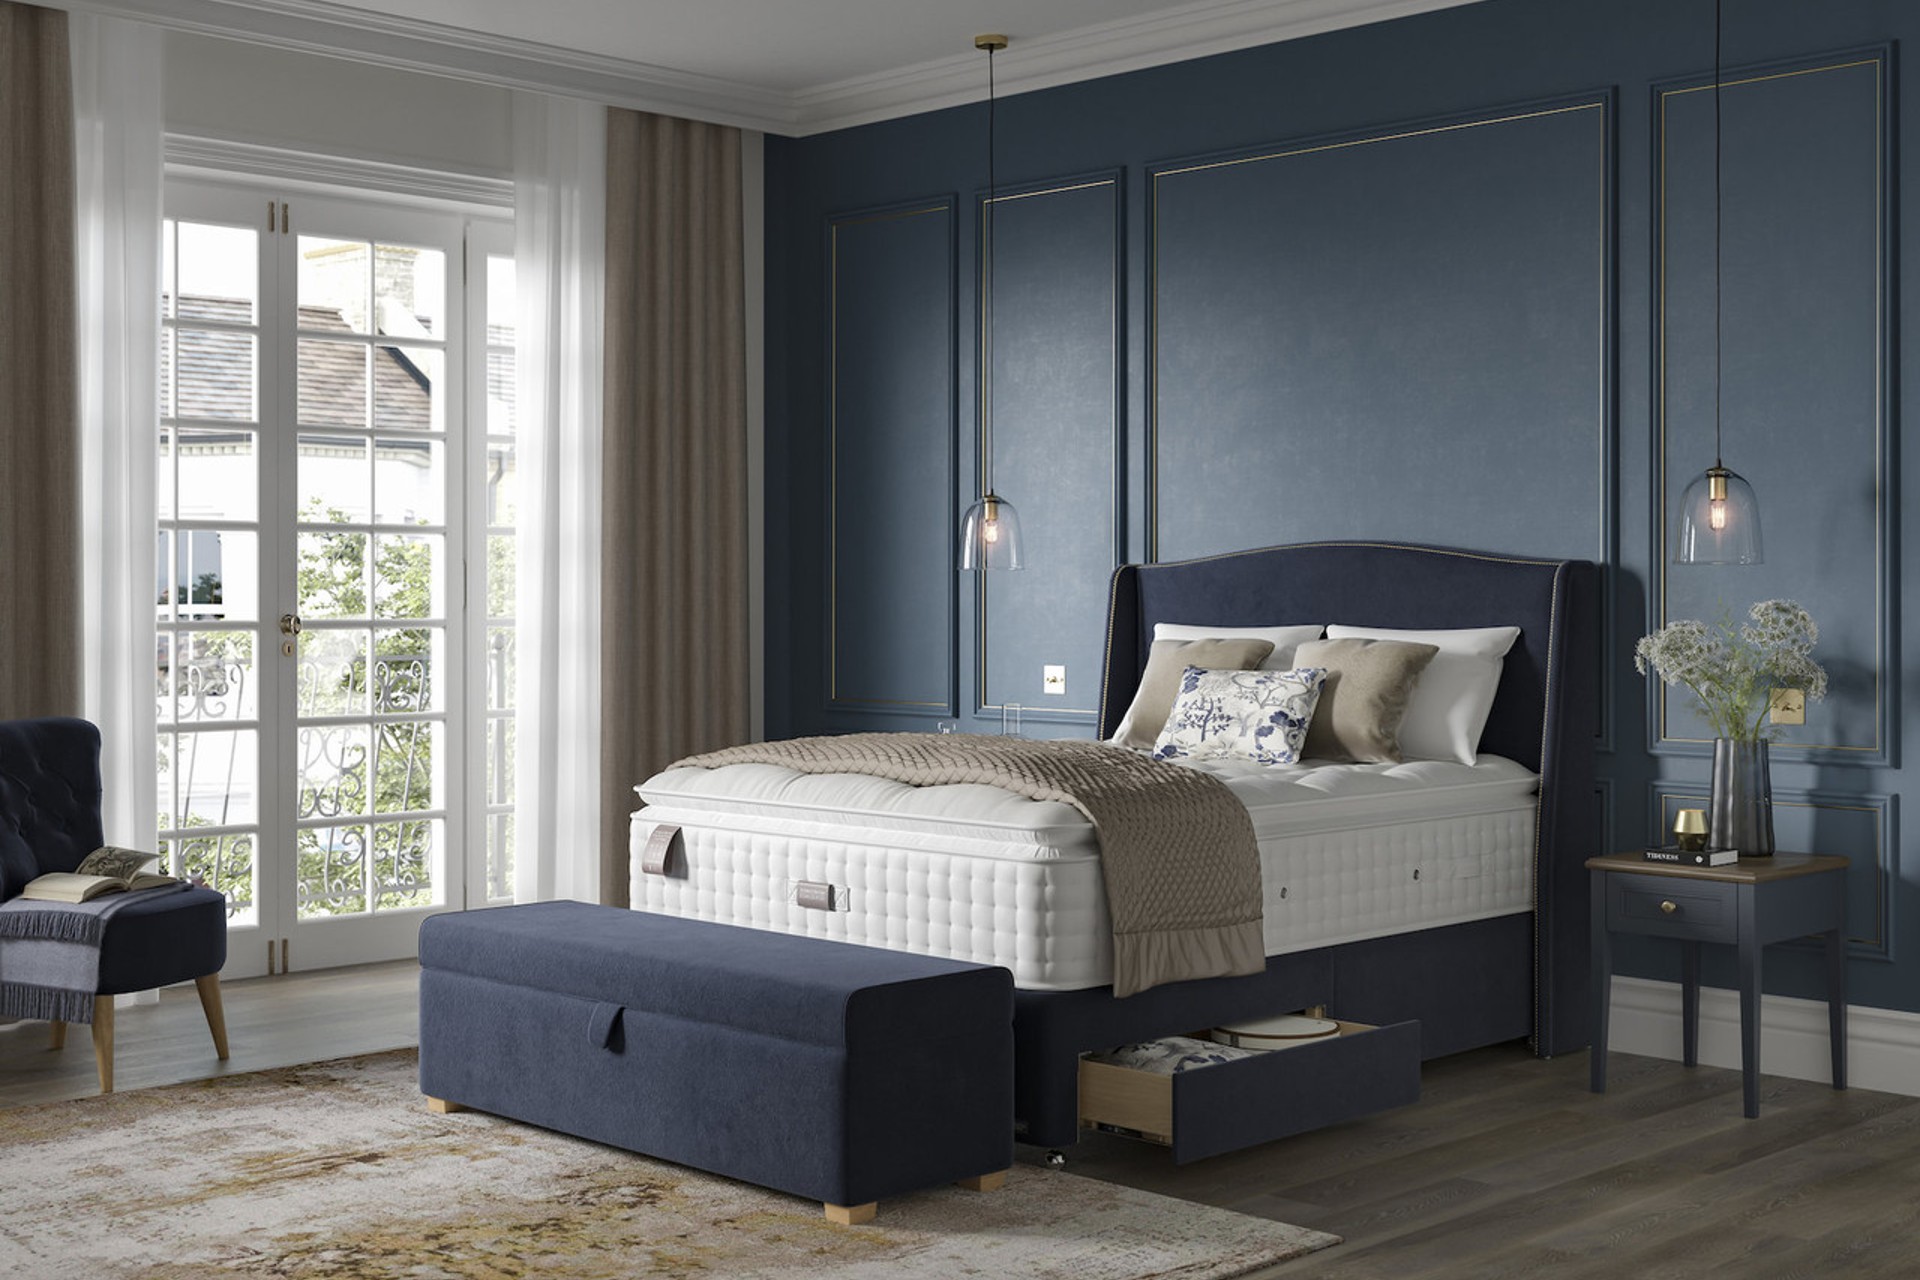 Staples and Co Artisan Grand Divan Bed Set On Castor wheels in Bespoke Prussian Blue